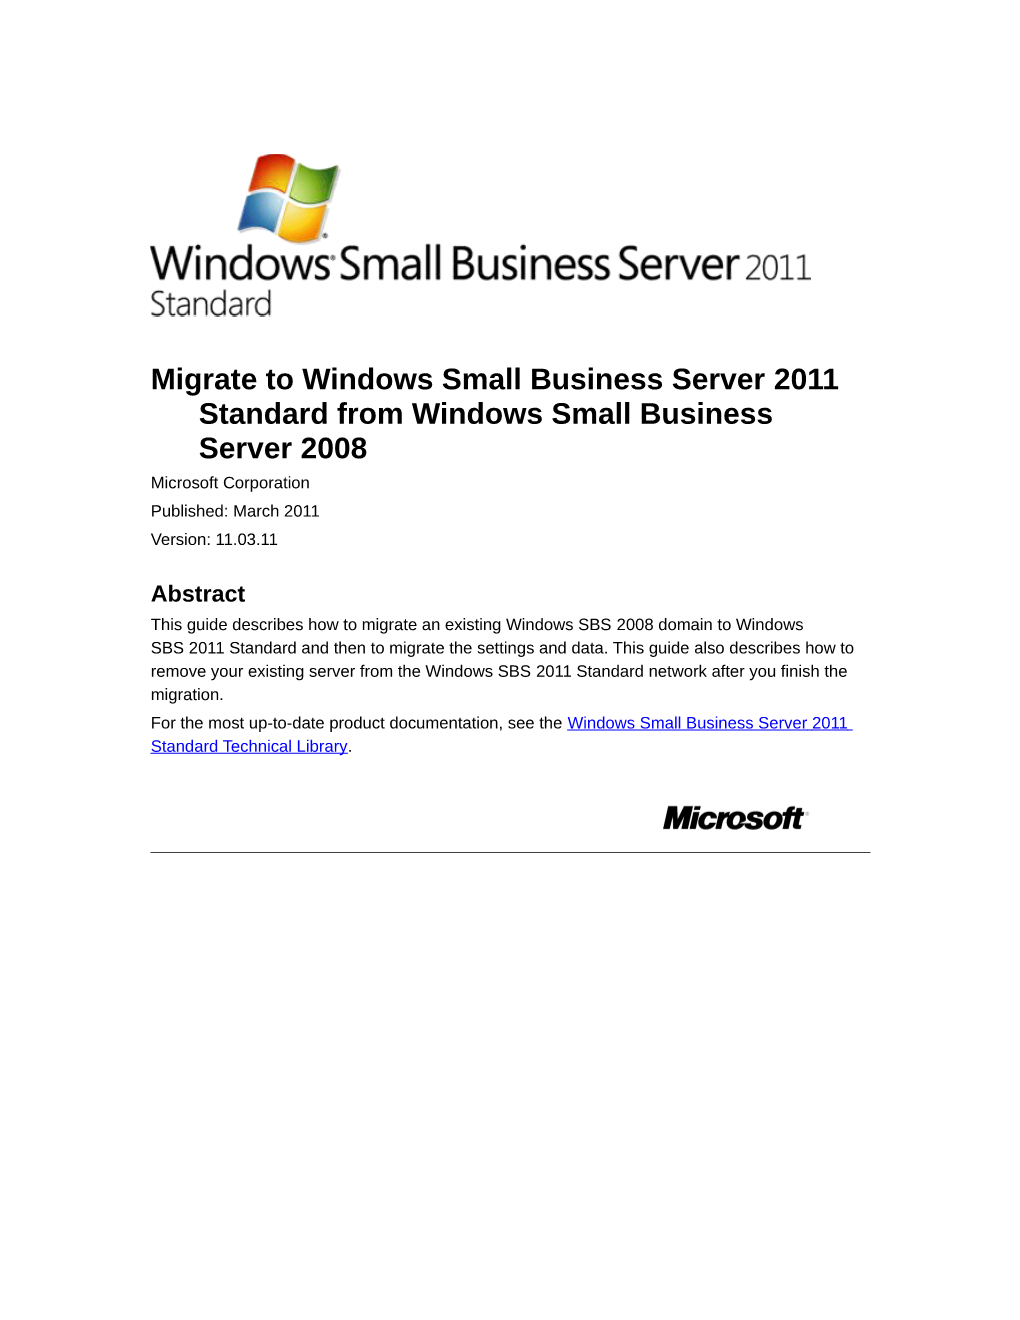 Migrate to Windows Small Business Server 2011 Standard from Windows Small Business Server 2008 Microsoft Corporation Published: March 2011 Version: 11.03.11